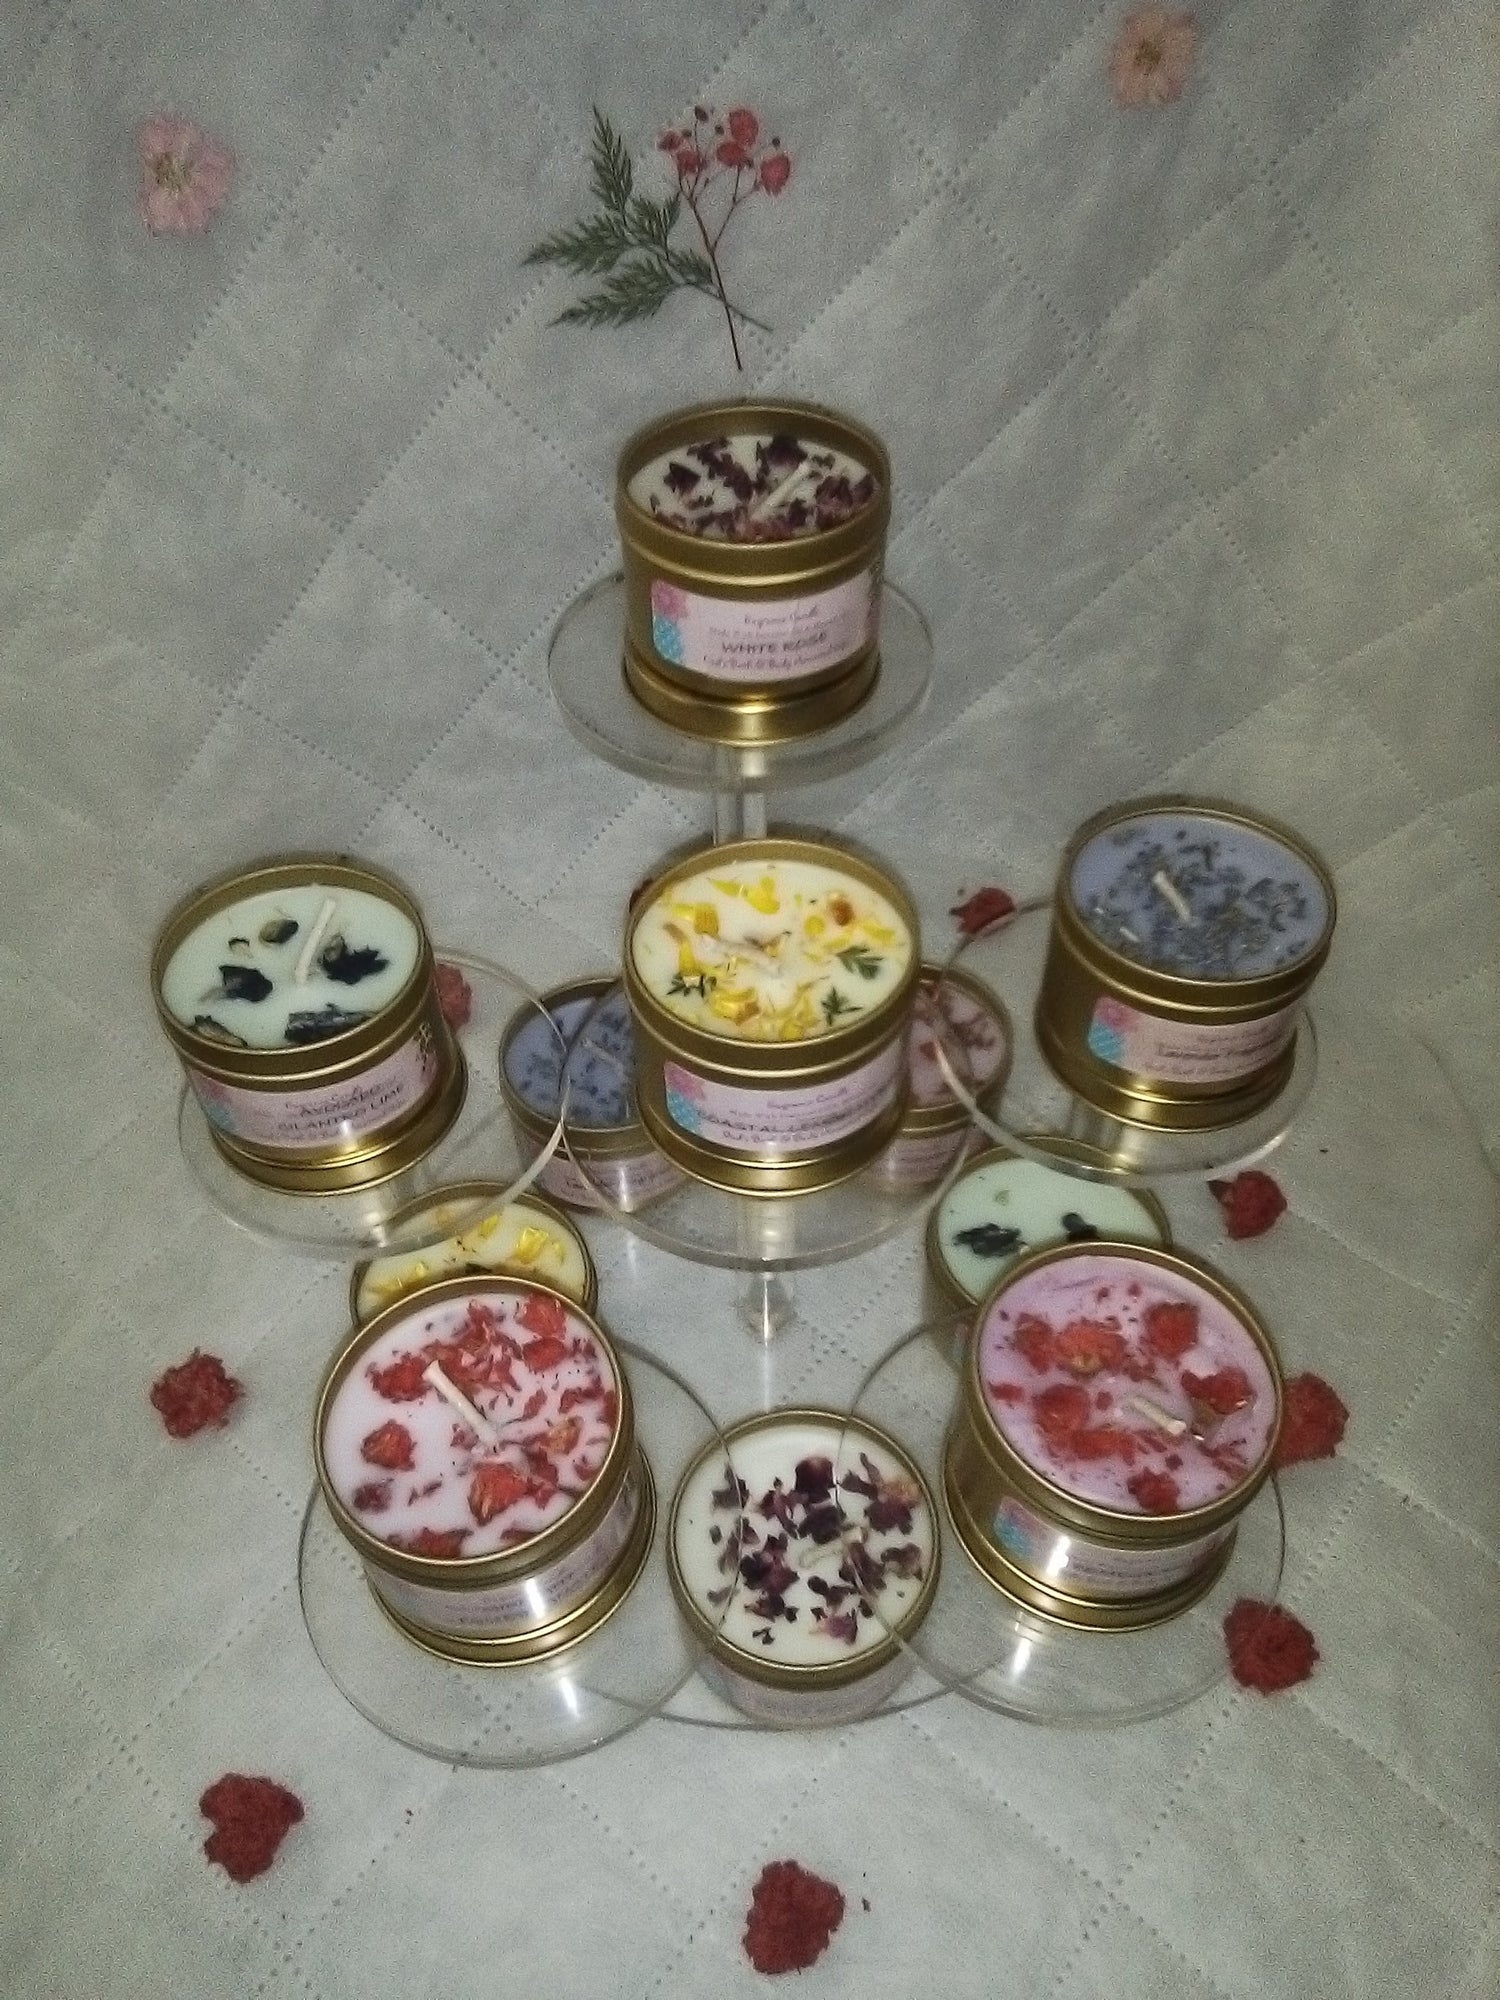 4oz small fragrance candles with lid.  "From the Favor of Queen Esther's Bath Collection"